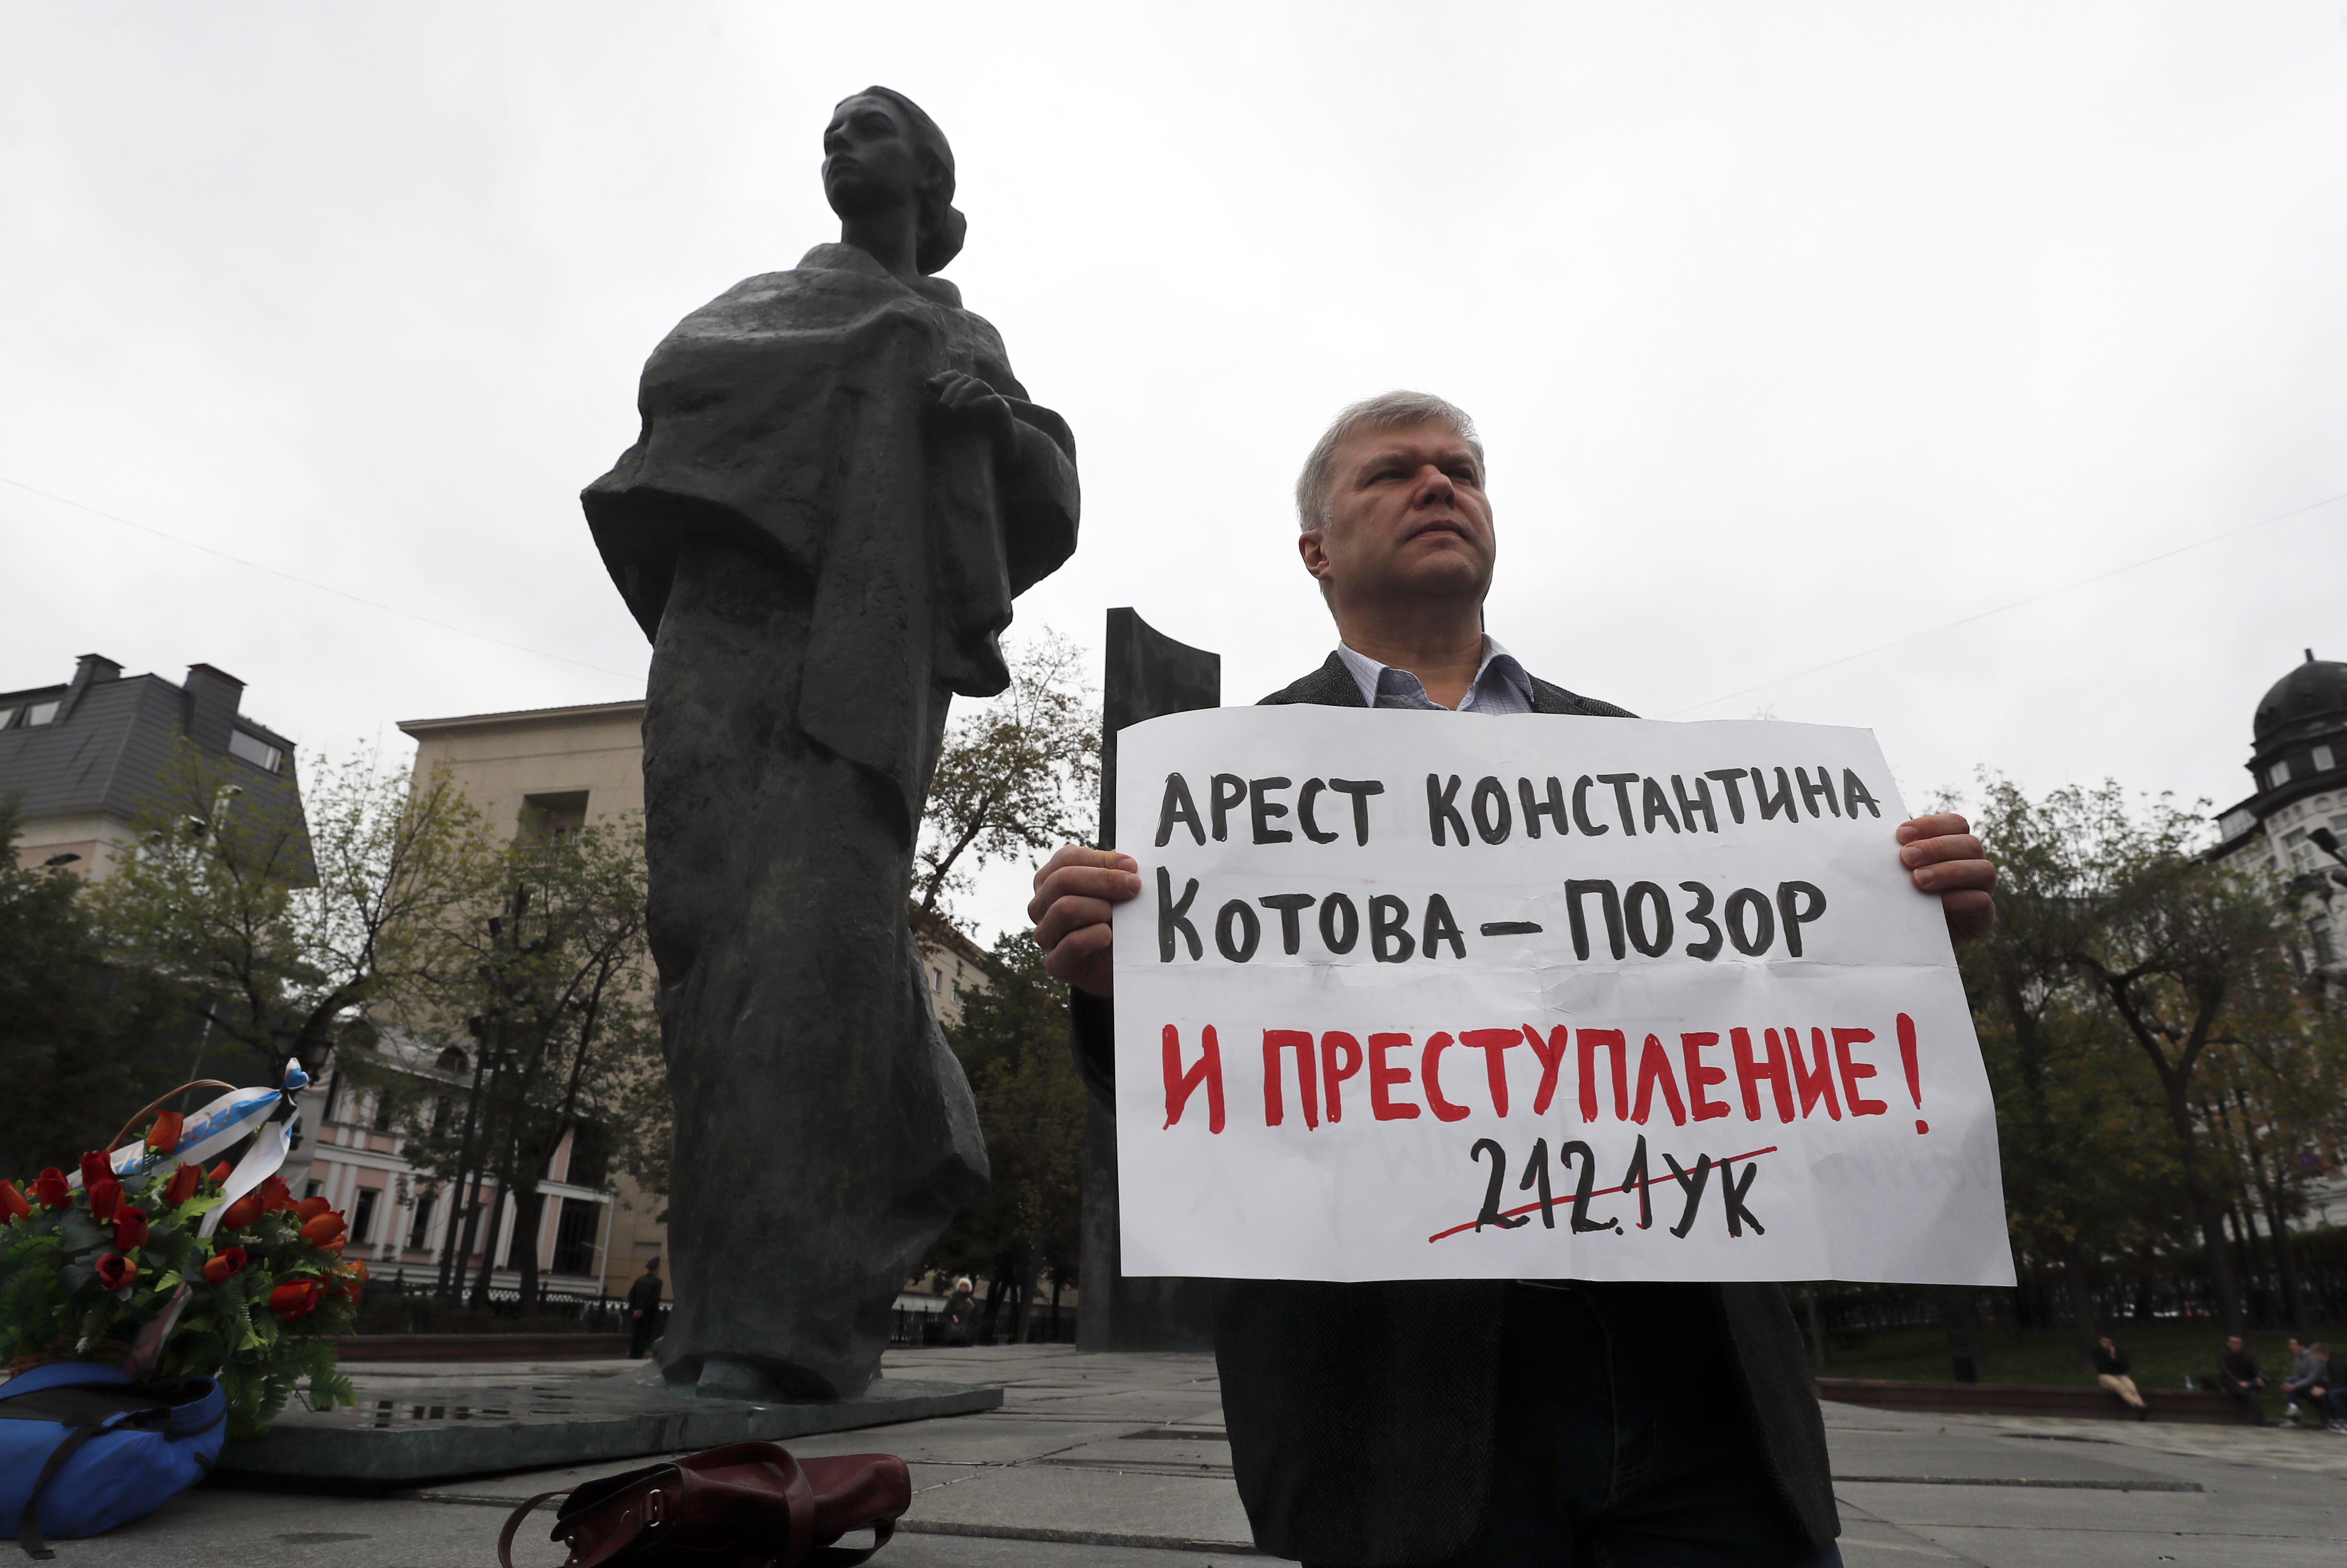 epa07777436 Sergei Mitrokhin, a representative of democratic party Yabloko, and also unregistered candidate, holds a placard reading 'Konstantin Kotov's arrest is a shame and crime! 212.1FC' during a single picket in the center of Moscow, Russia, 17 August 2019. Liberal opposition protest against decision of the Central Elections Commission not to register their candidates for Moscow City Duma elections, which are scheduled on 08 September.  EPA/SERGEI ILNITSKY